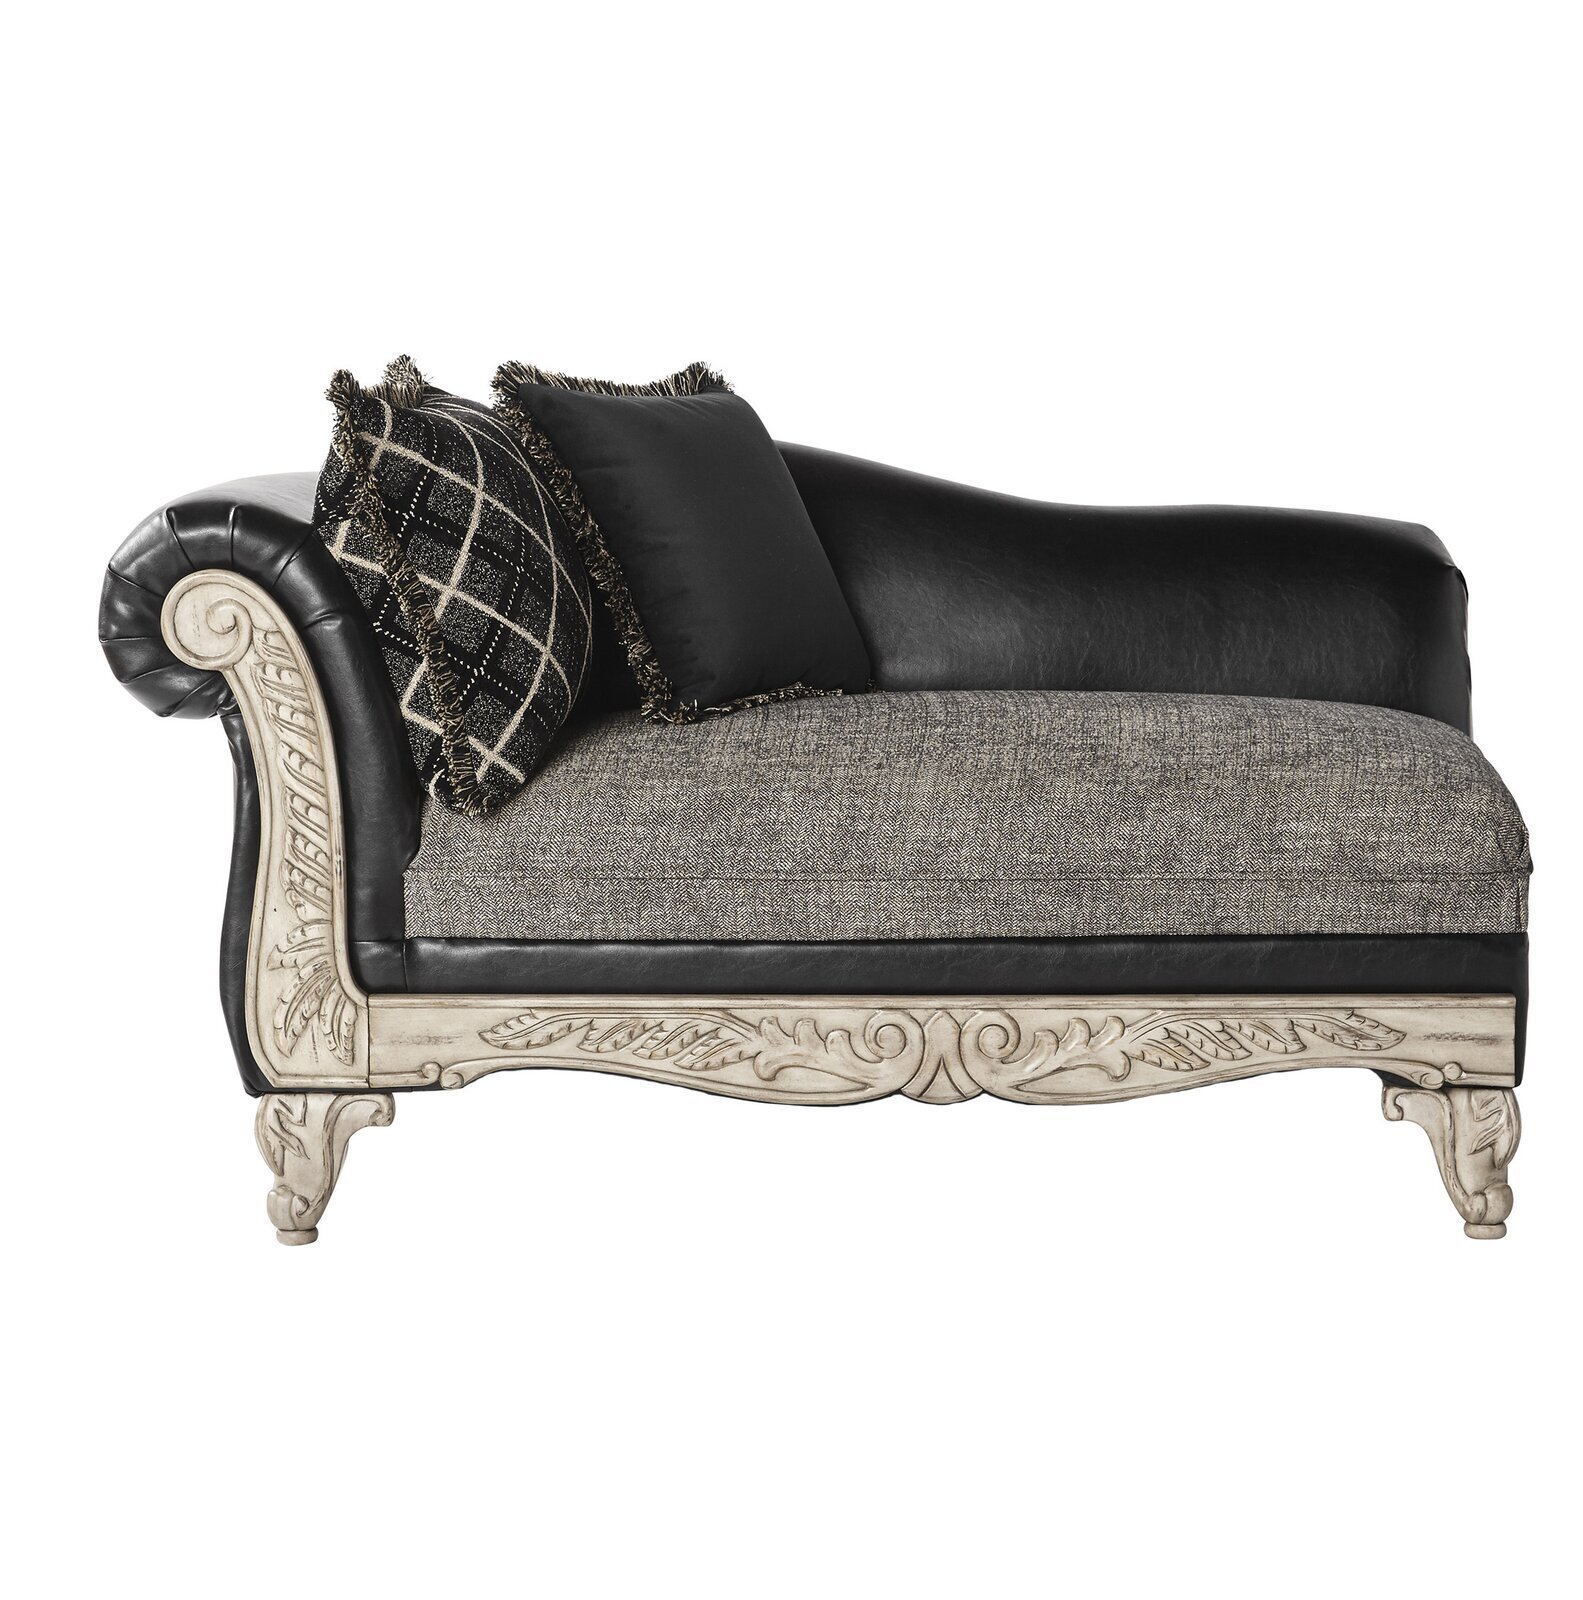 Luxurious Victorian chaise lounge